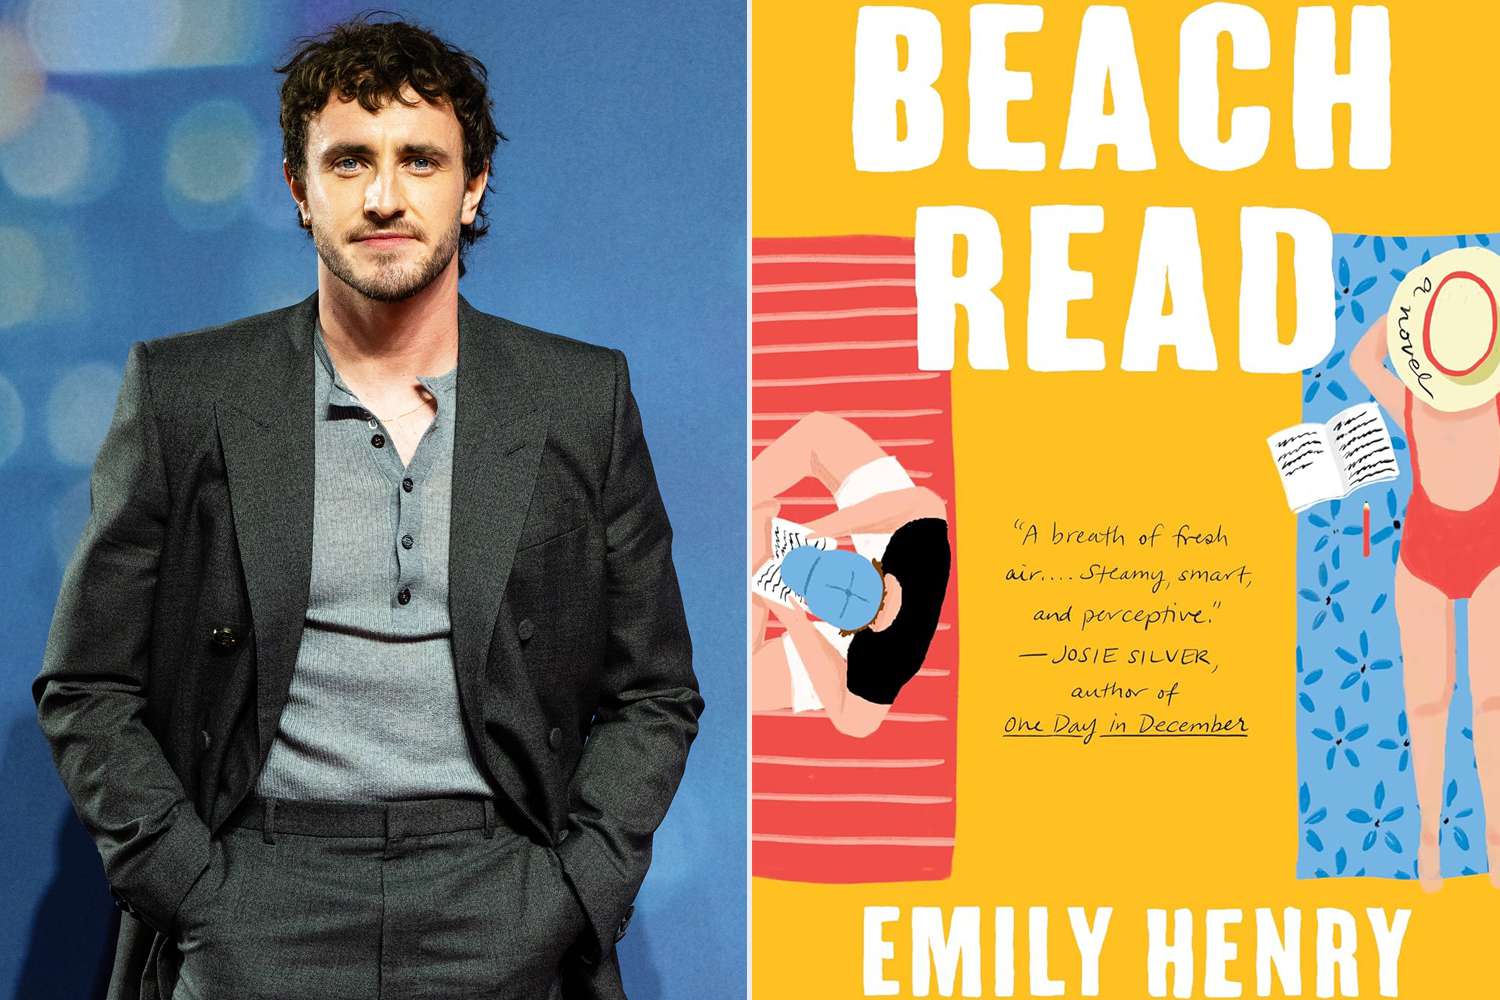 No, Paul Mescal Hasn't Been Cast in the “Beach Read” Adaptation — Yet: 'I Love All the Ideas,' Director Says